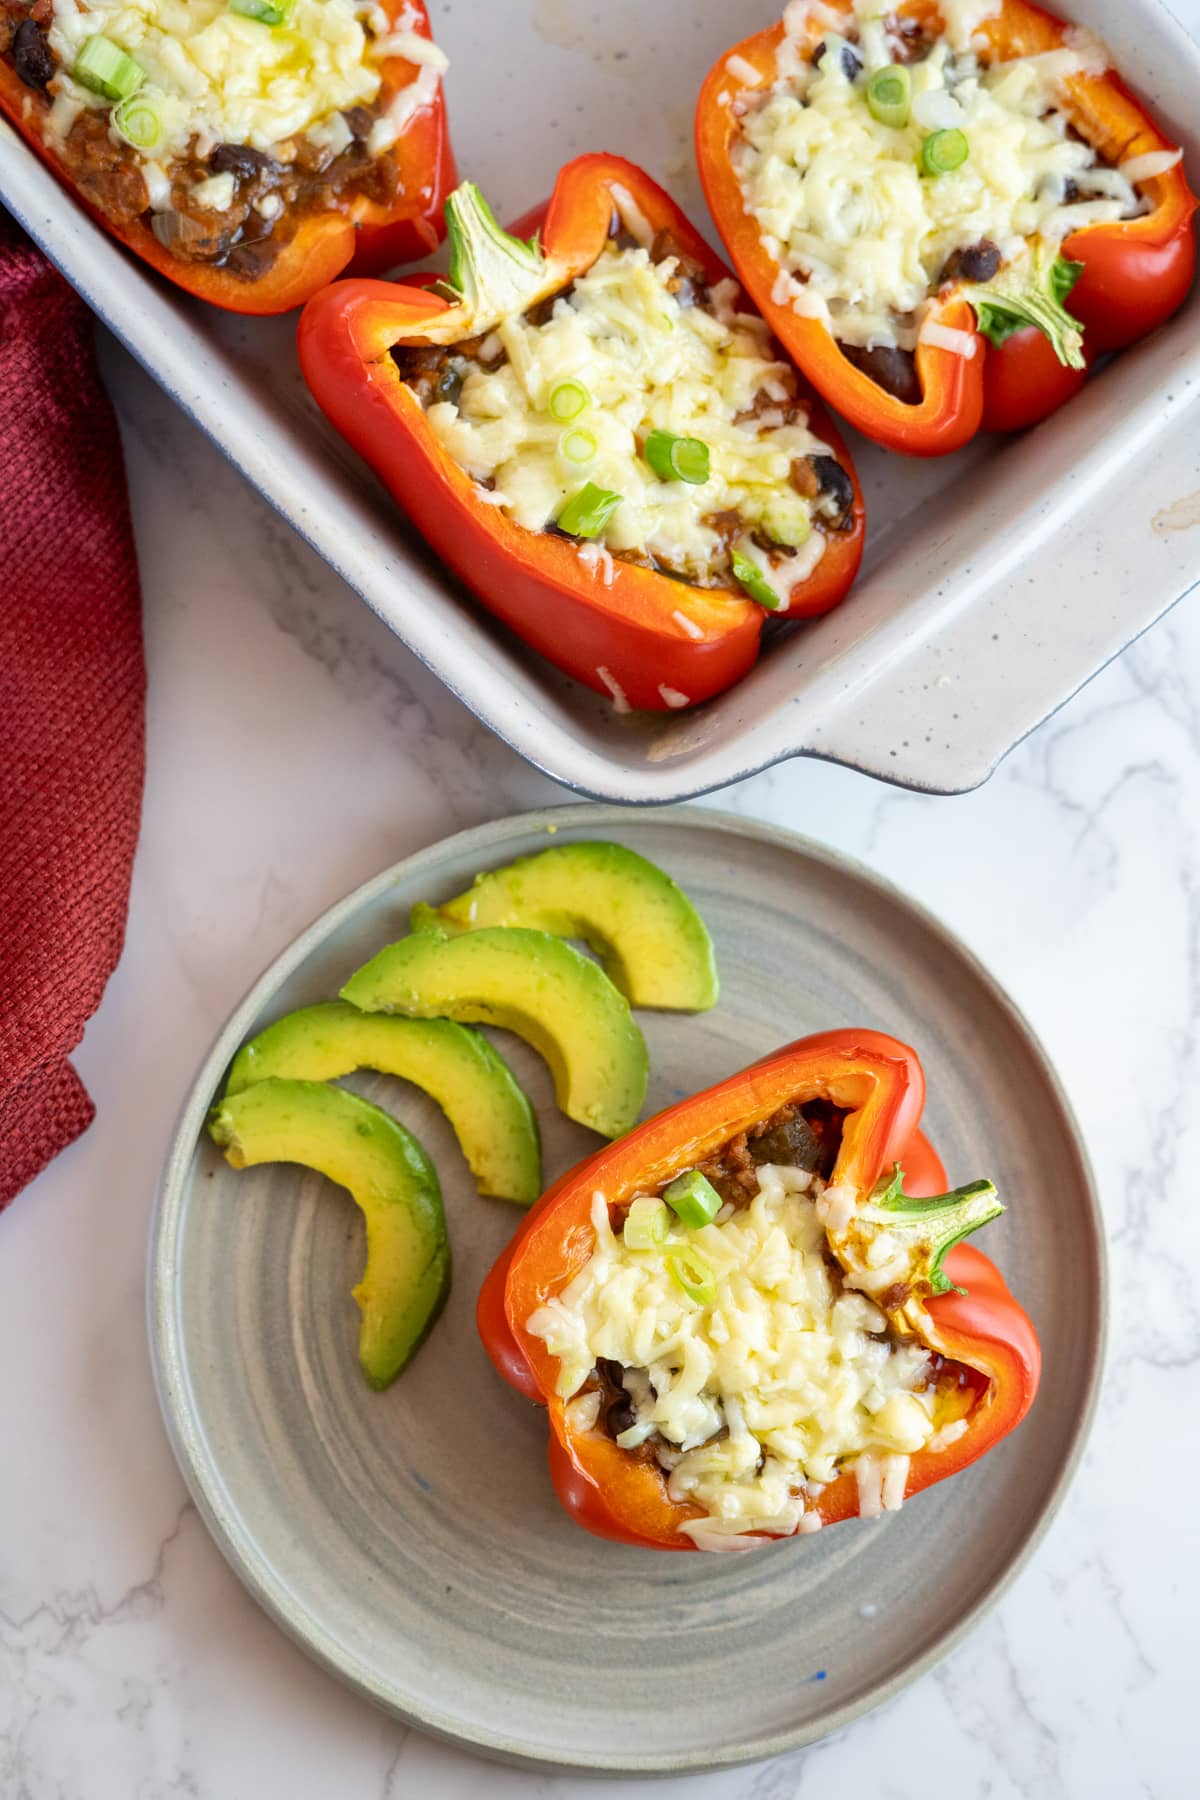 Stuffed peppers with cheese and avocado on a plate.